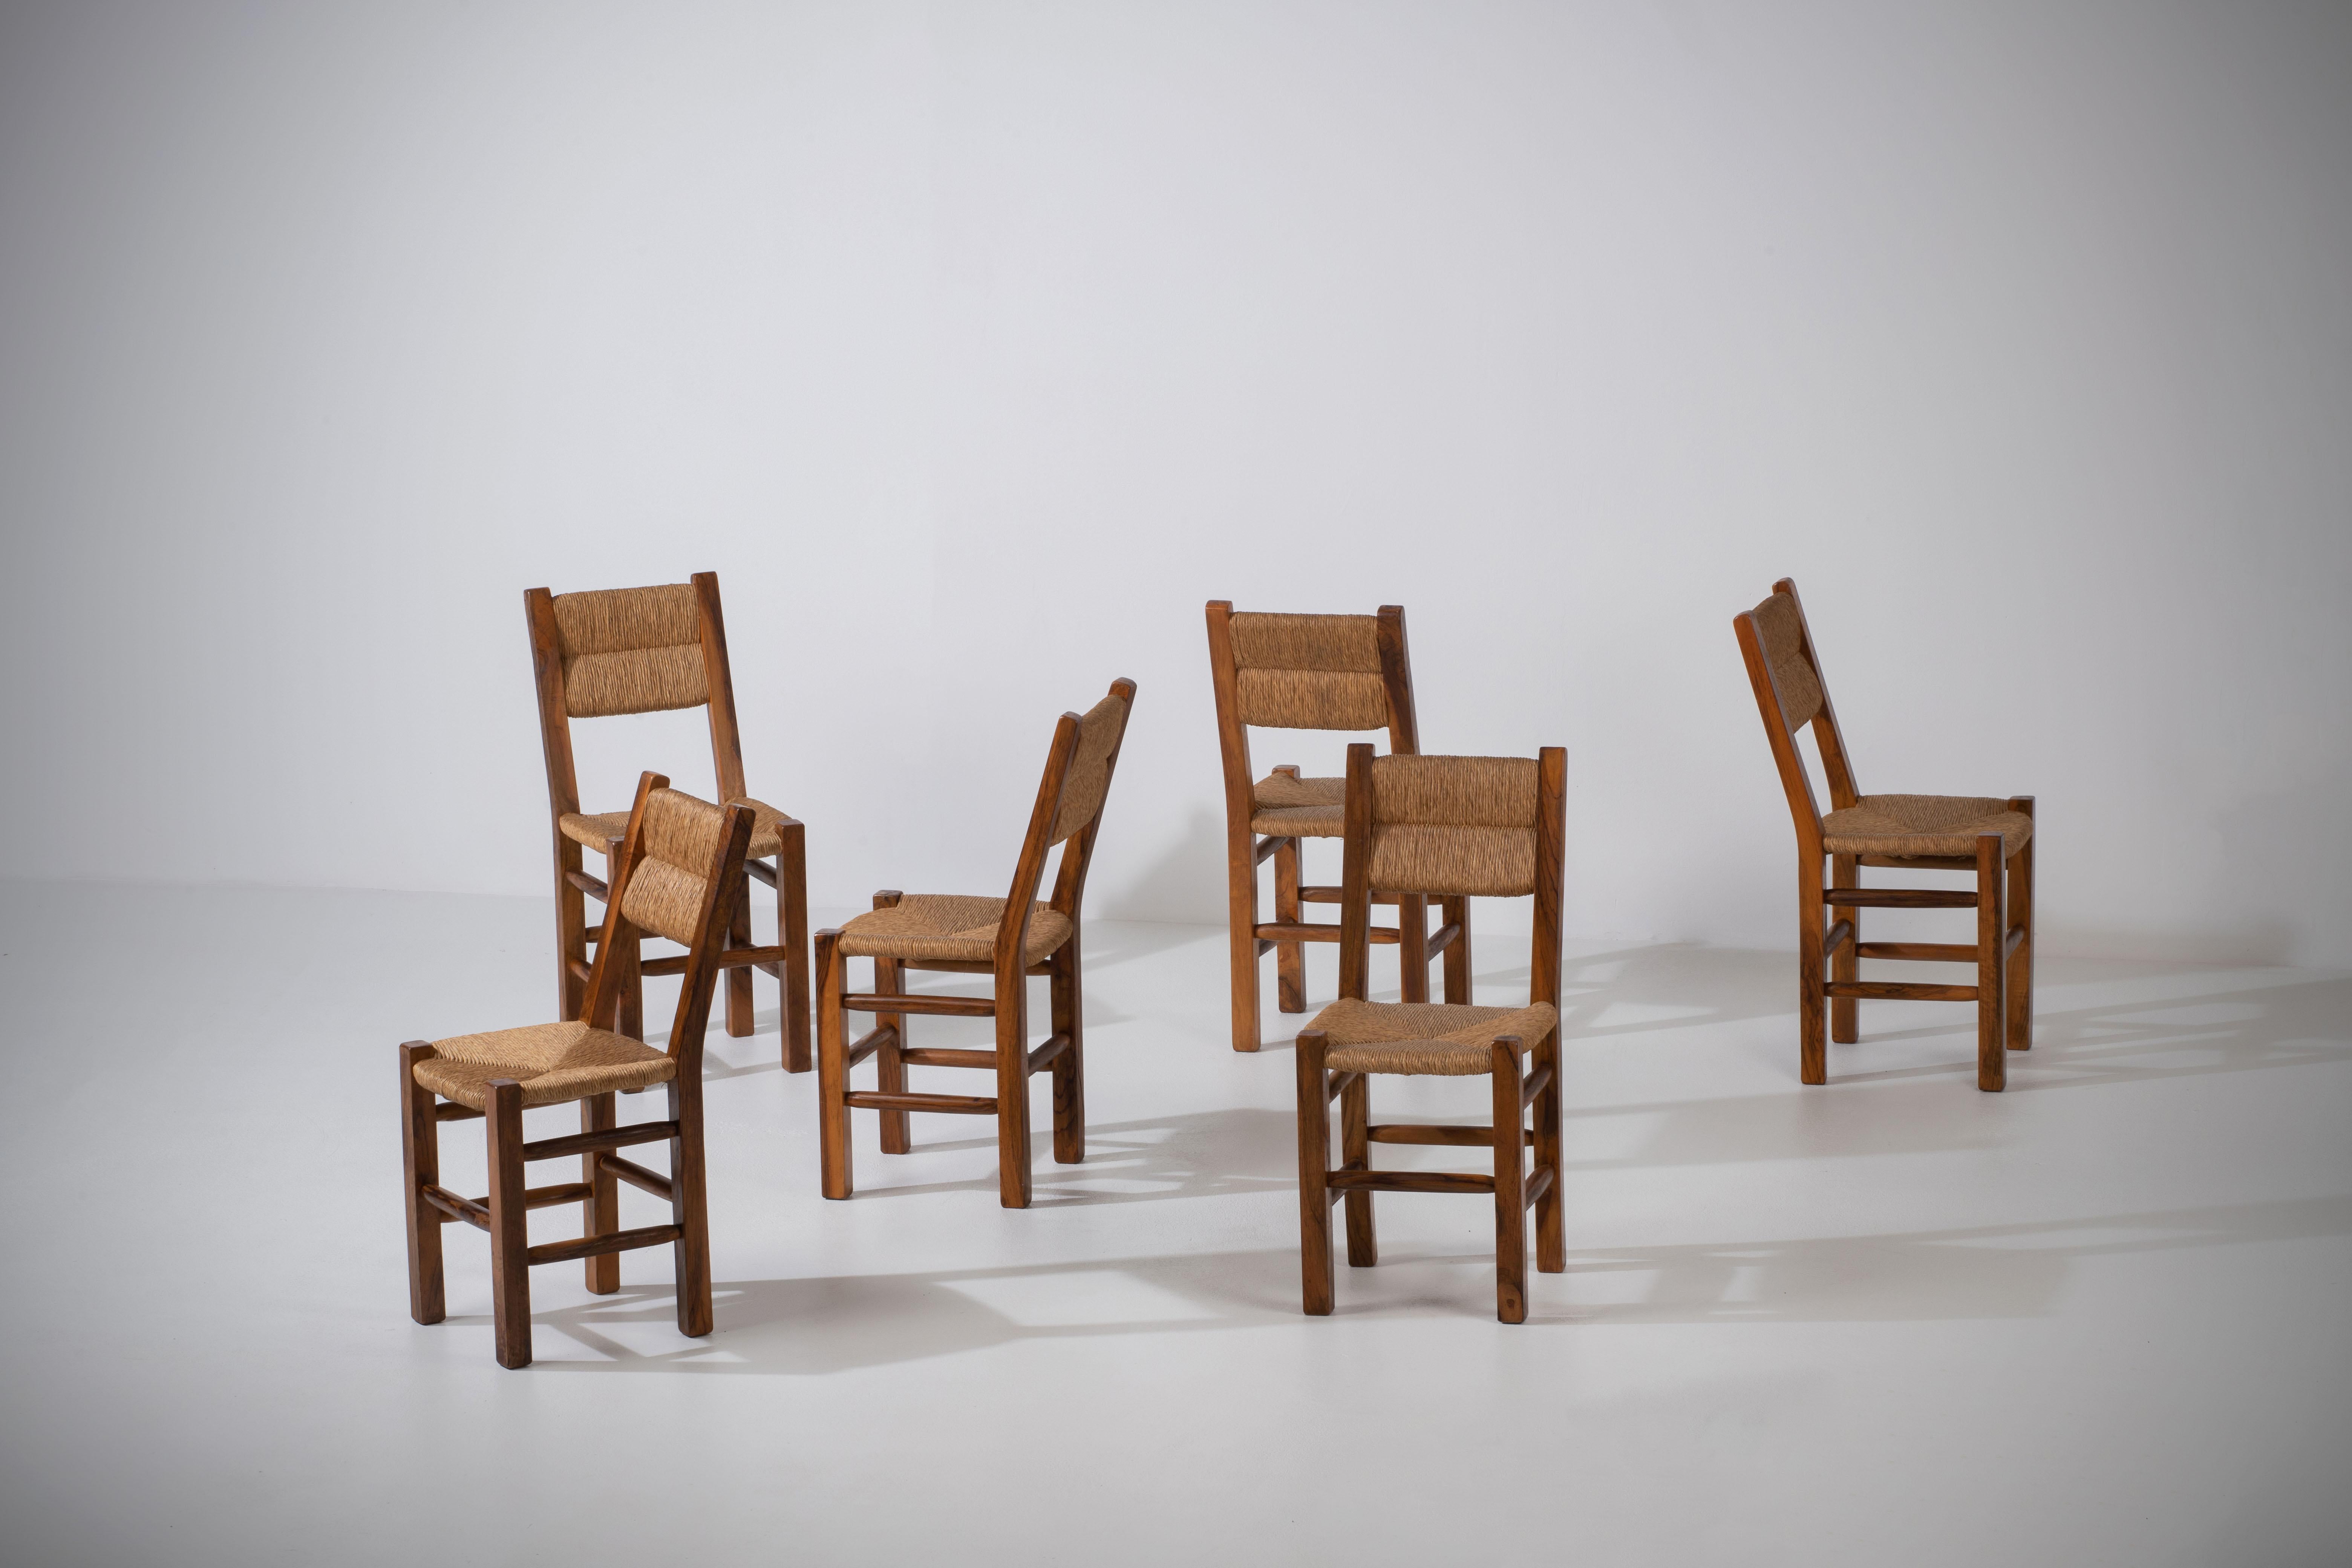 Introducing a stunning set of six mid-century chairs from France, crafted with a beautiful combination of olivewood and rush seating. These chairs pay homage to the influential works of renowned designers such as Charlotte Perriand and Adrien Audoux